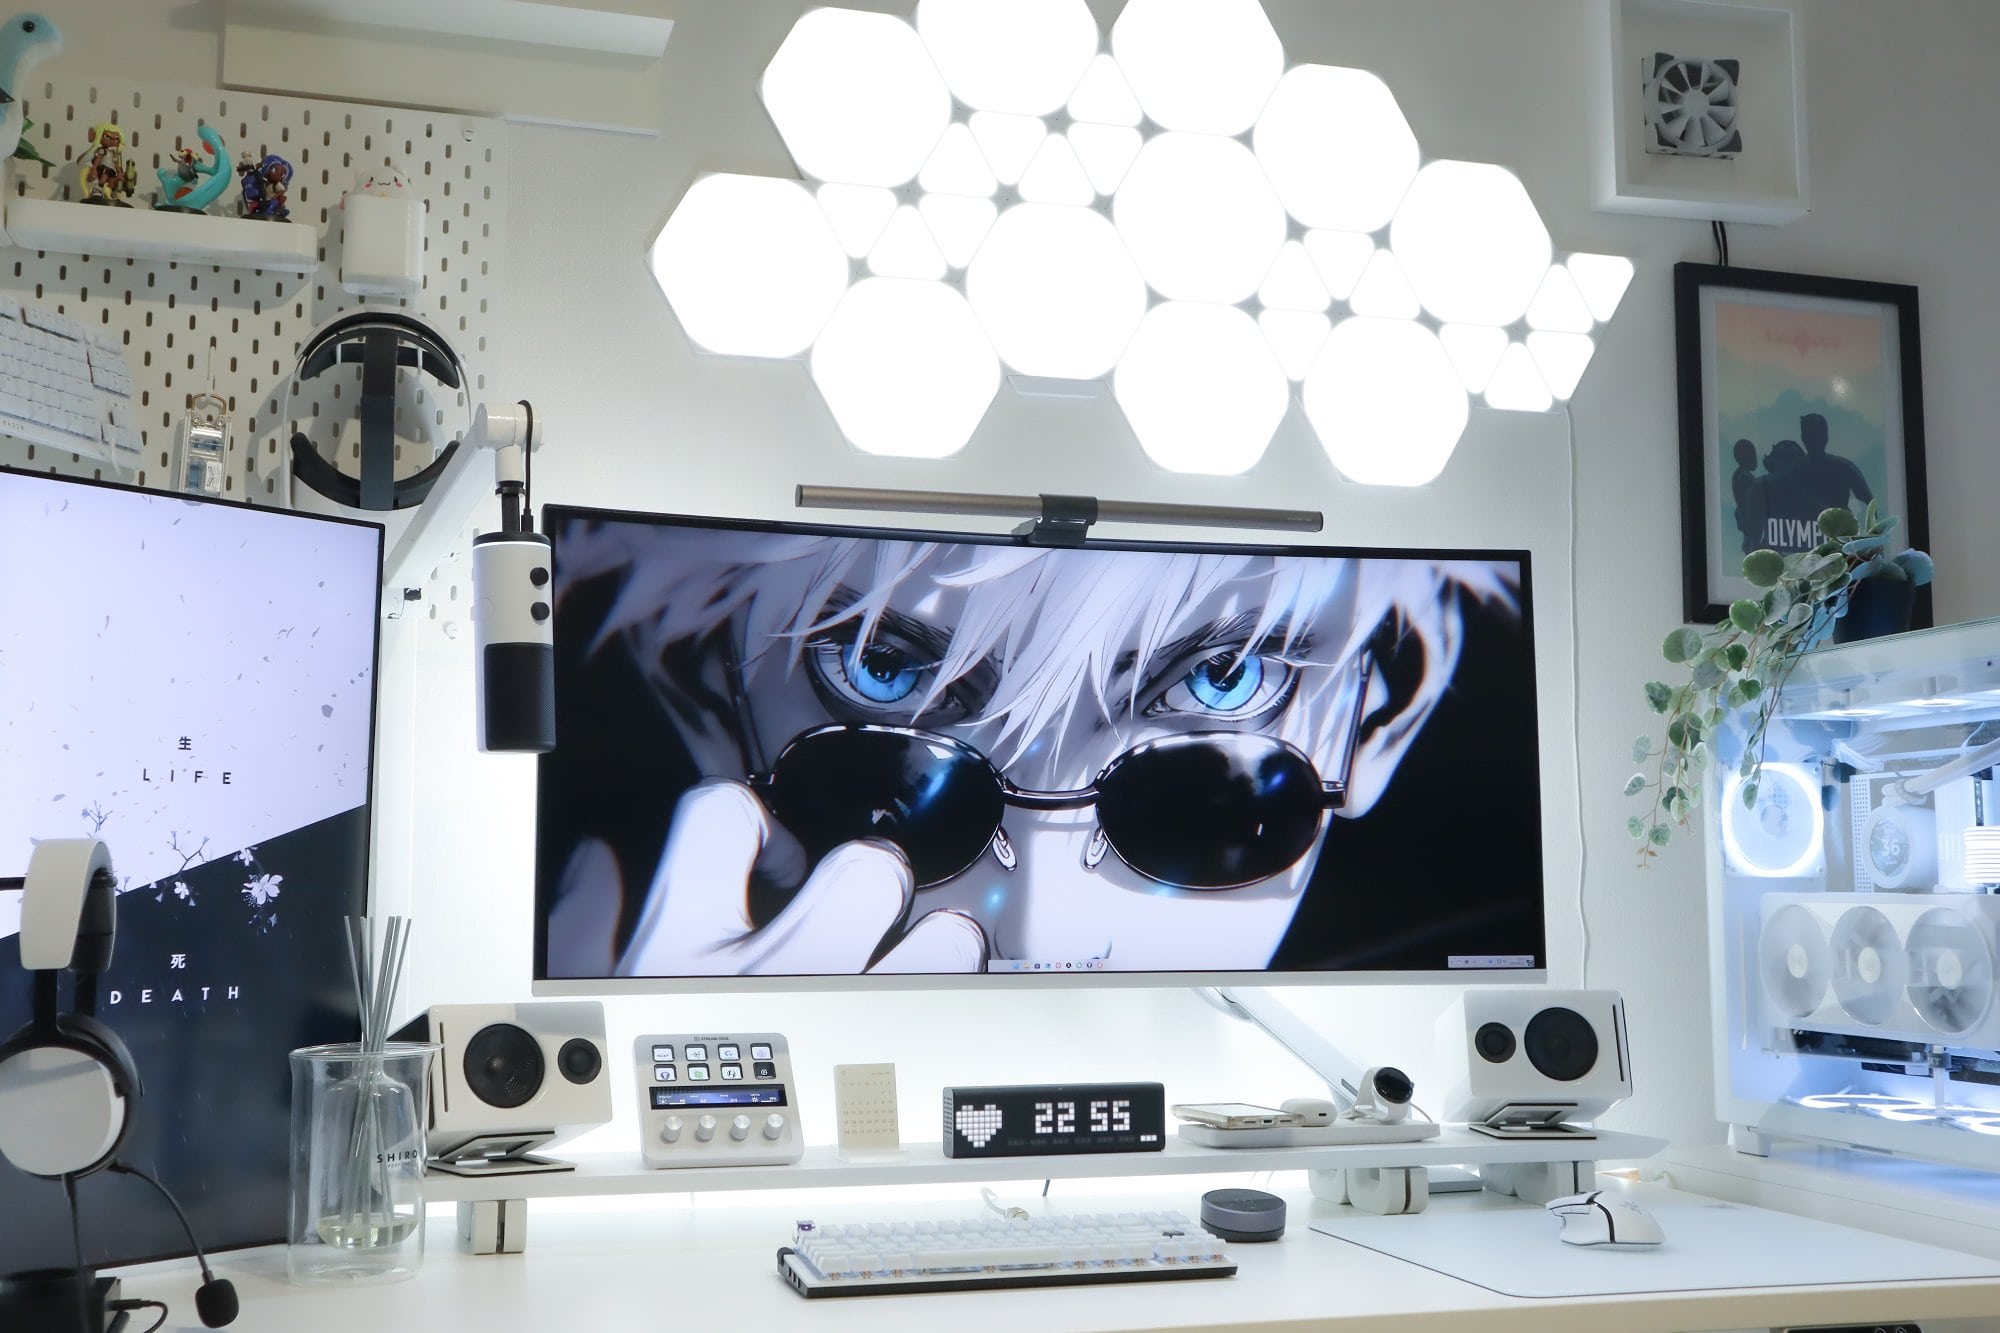 A modern desk setup with an anime-themed ultrawide monitor, flanked by speakers and tech accessories, with an LED-lit custom PC on the right, all under a striking ceiling light fixture